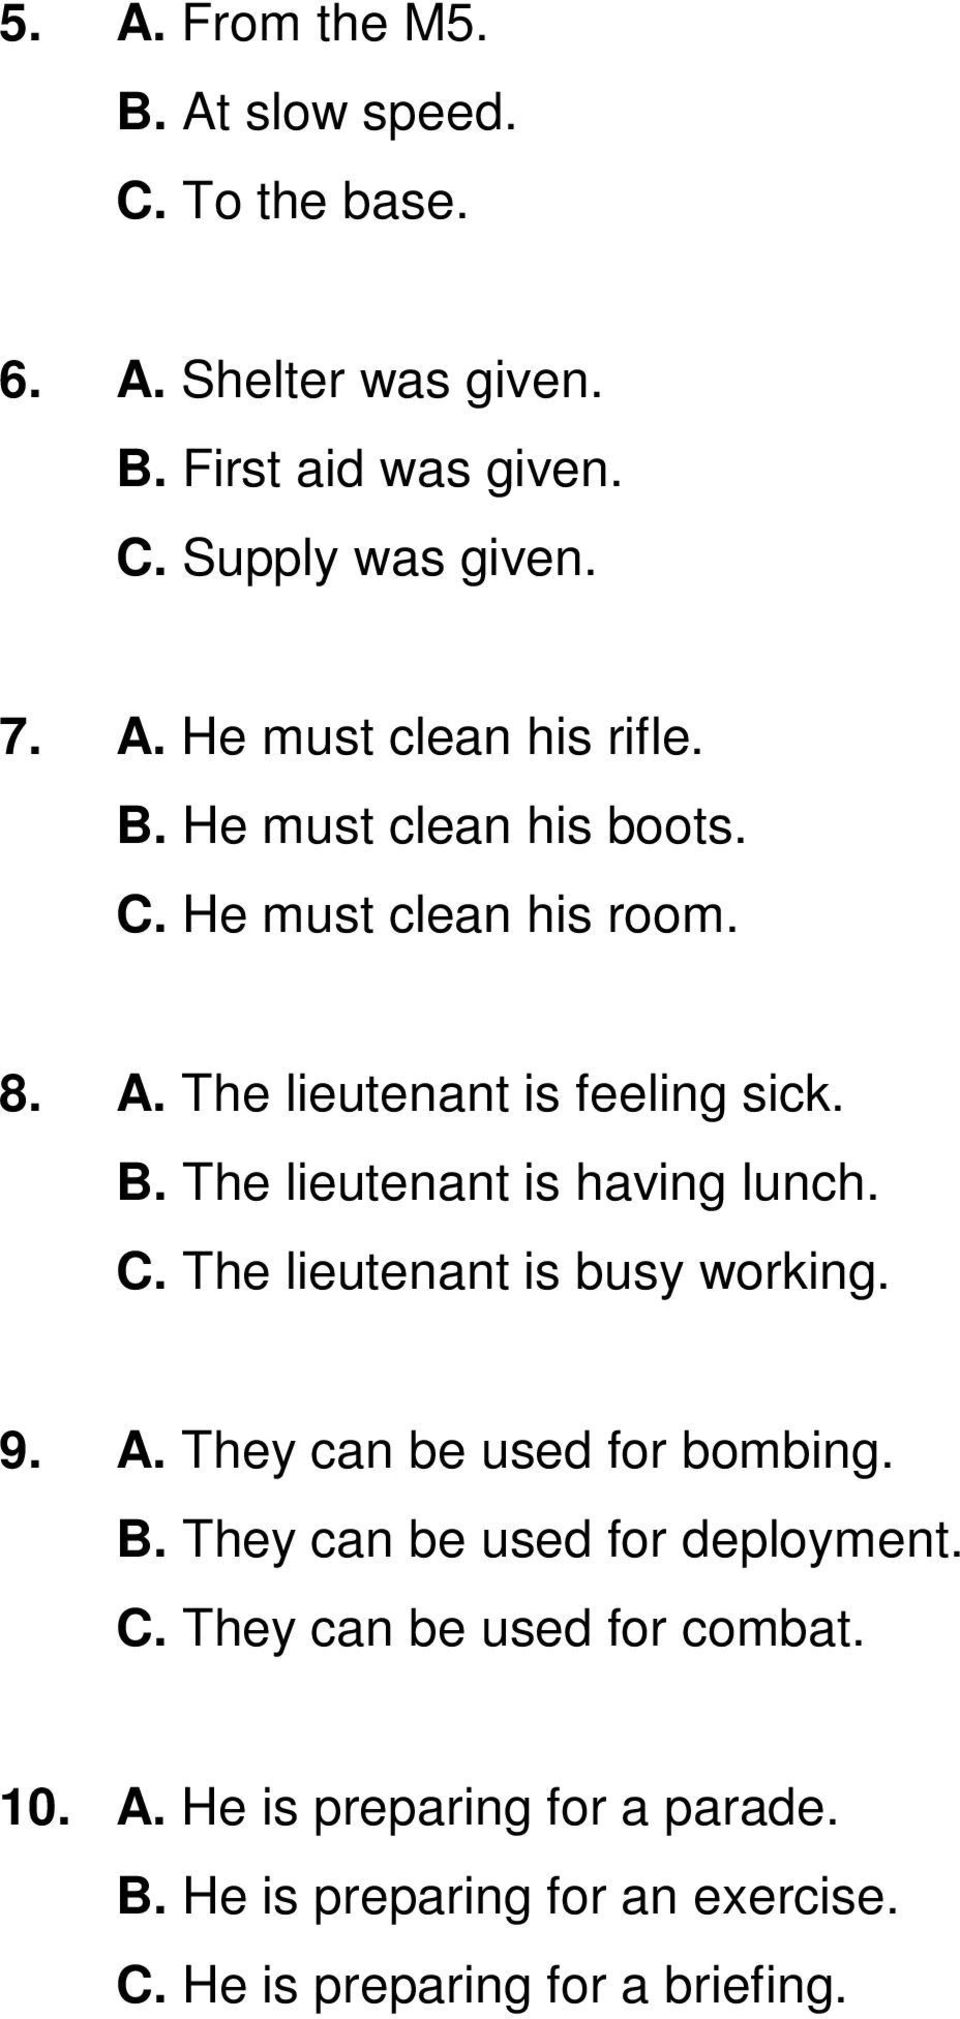 9. A. They can be used for bombing. B. They can be used for deployment. C. They can be used for combat. 10. A. He is preparing for a parade.